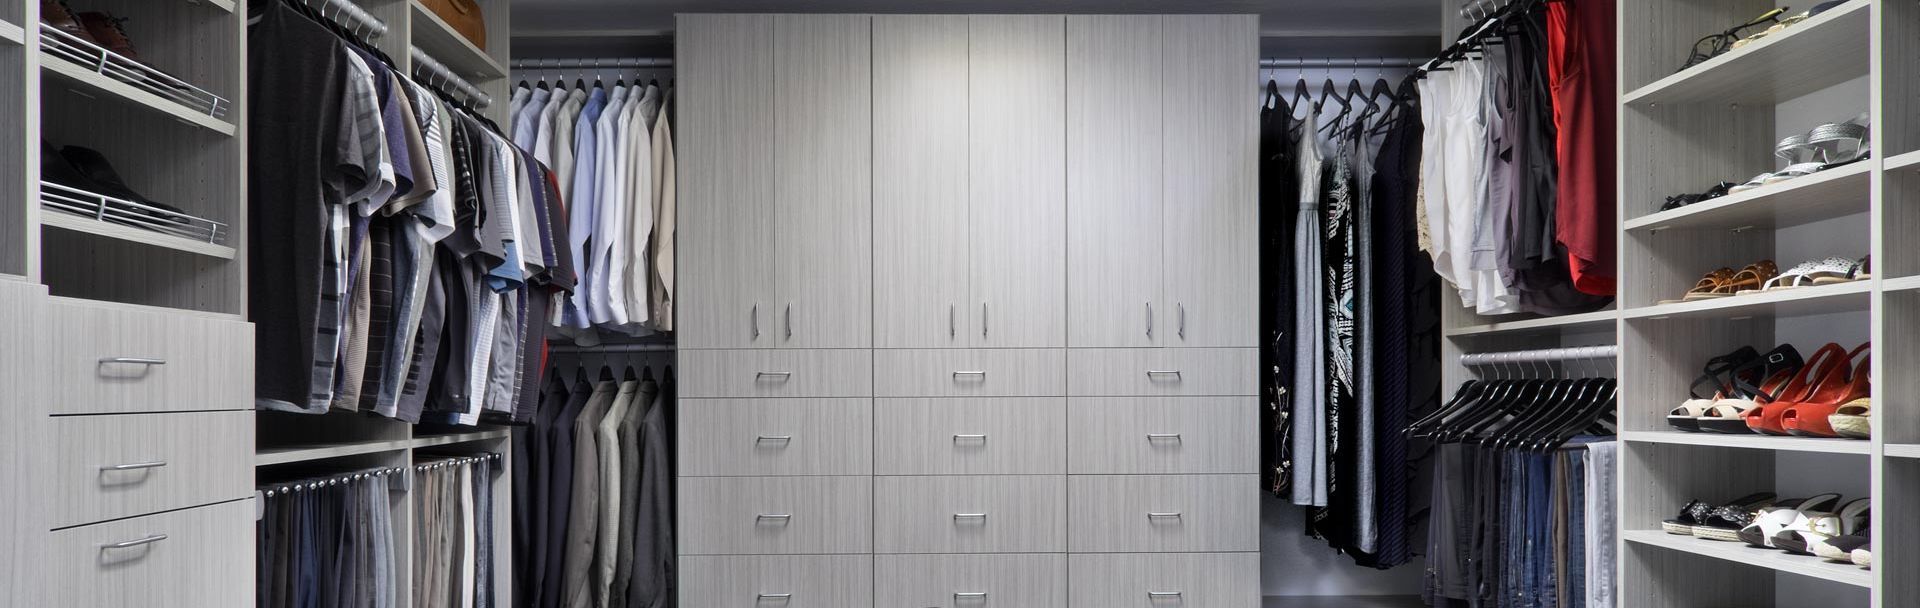 a concrete finish walk in closet system filled with clothes, shoes 